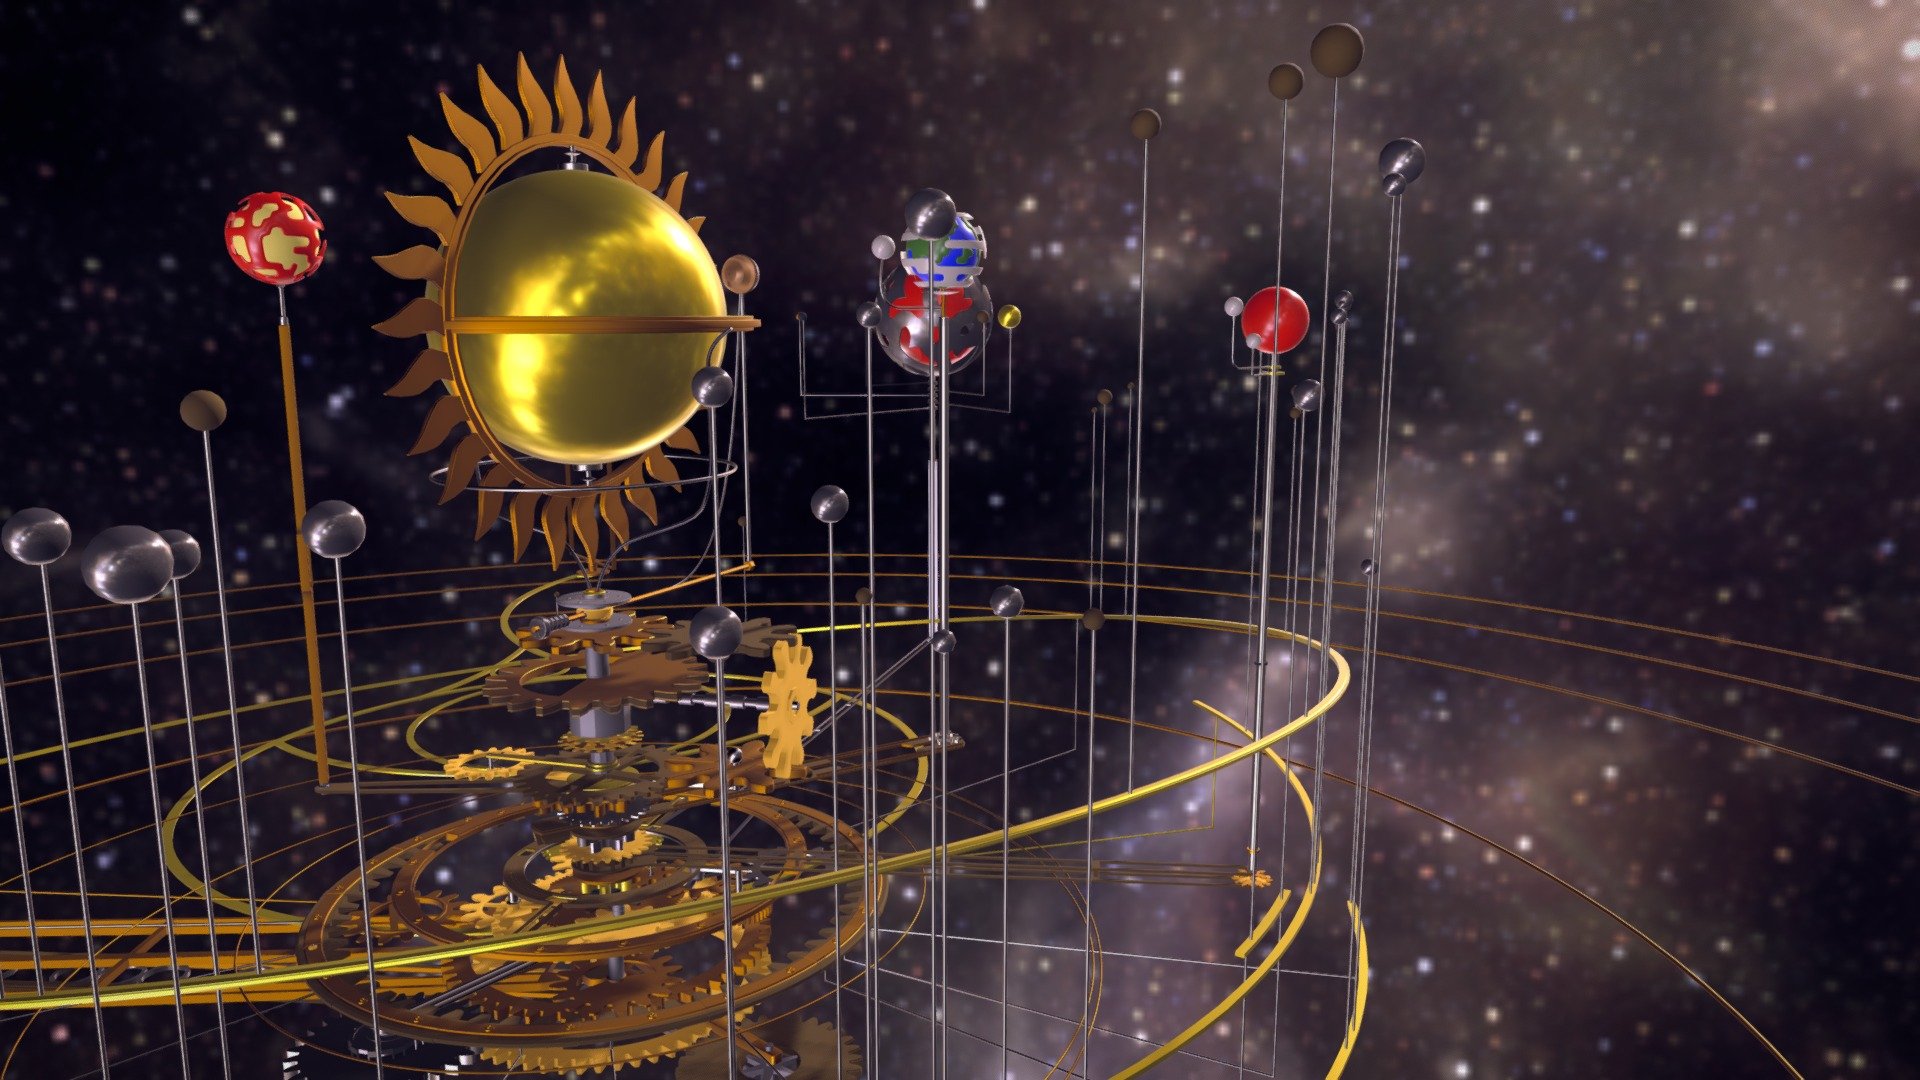 An animated heliocentric orrery.
Includes planets, major moons and the asteroid belt.
Originally modelled in 3dsmax with all animation driven procedurally with wire parameters from one controlling gear and built for a projection mapping show in Northern Ireland to reference the Armagh Observatory 3d model